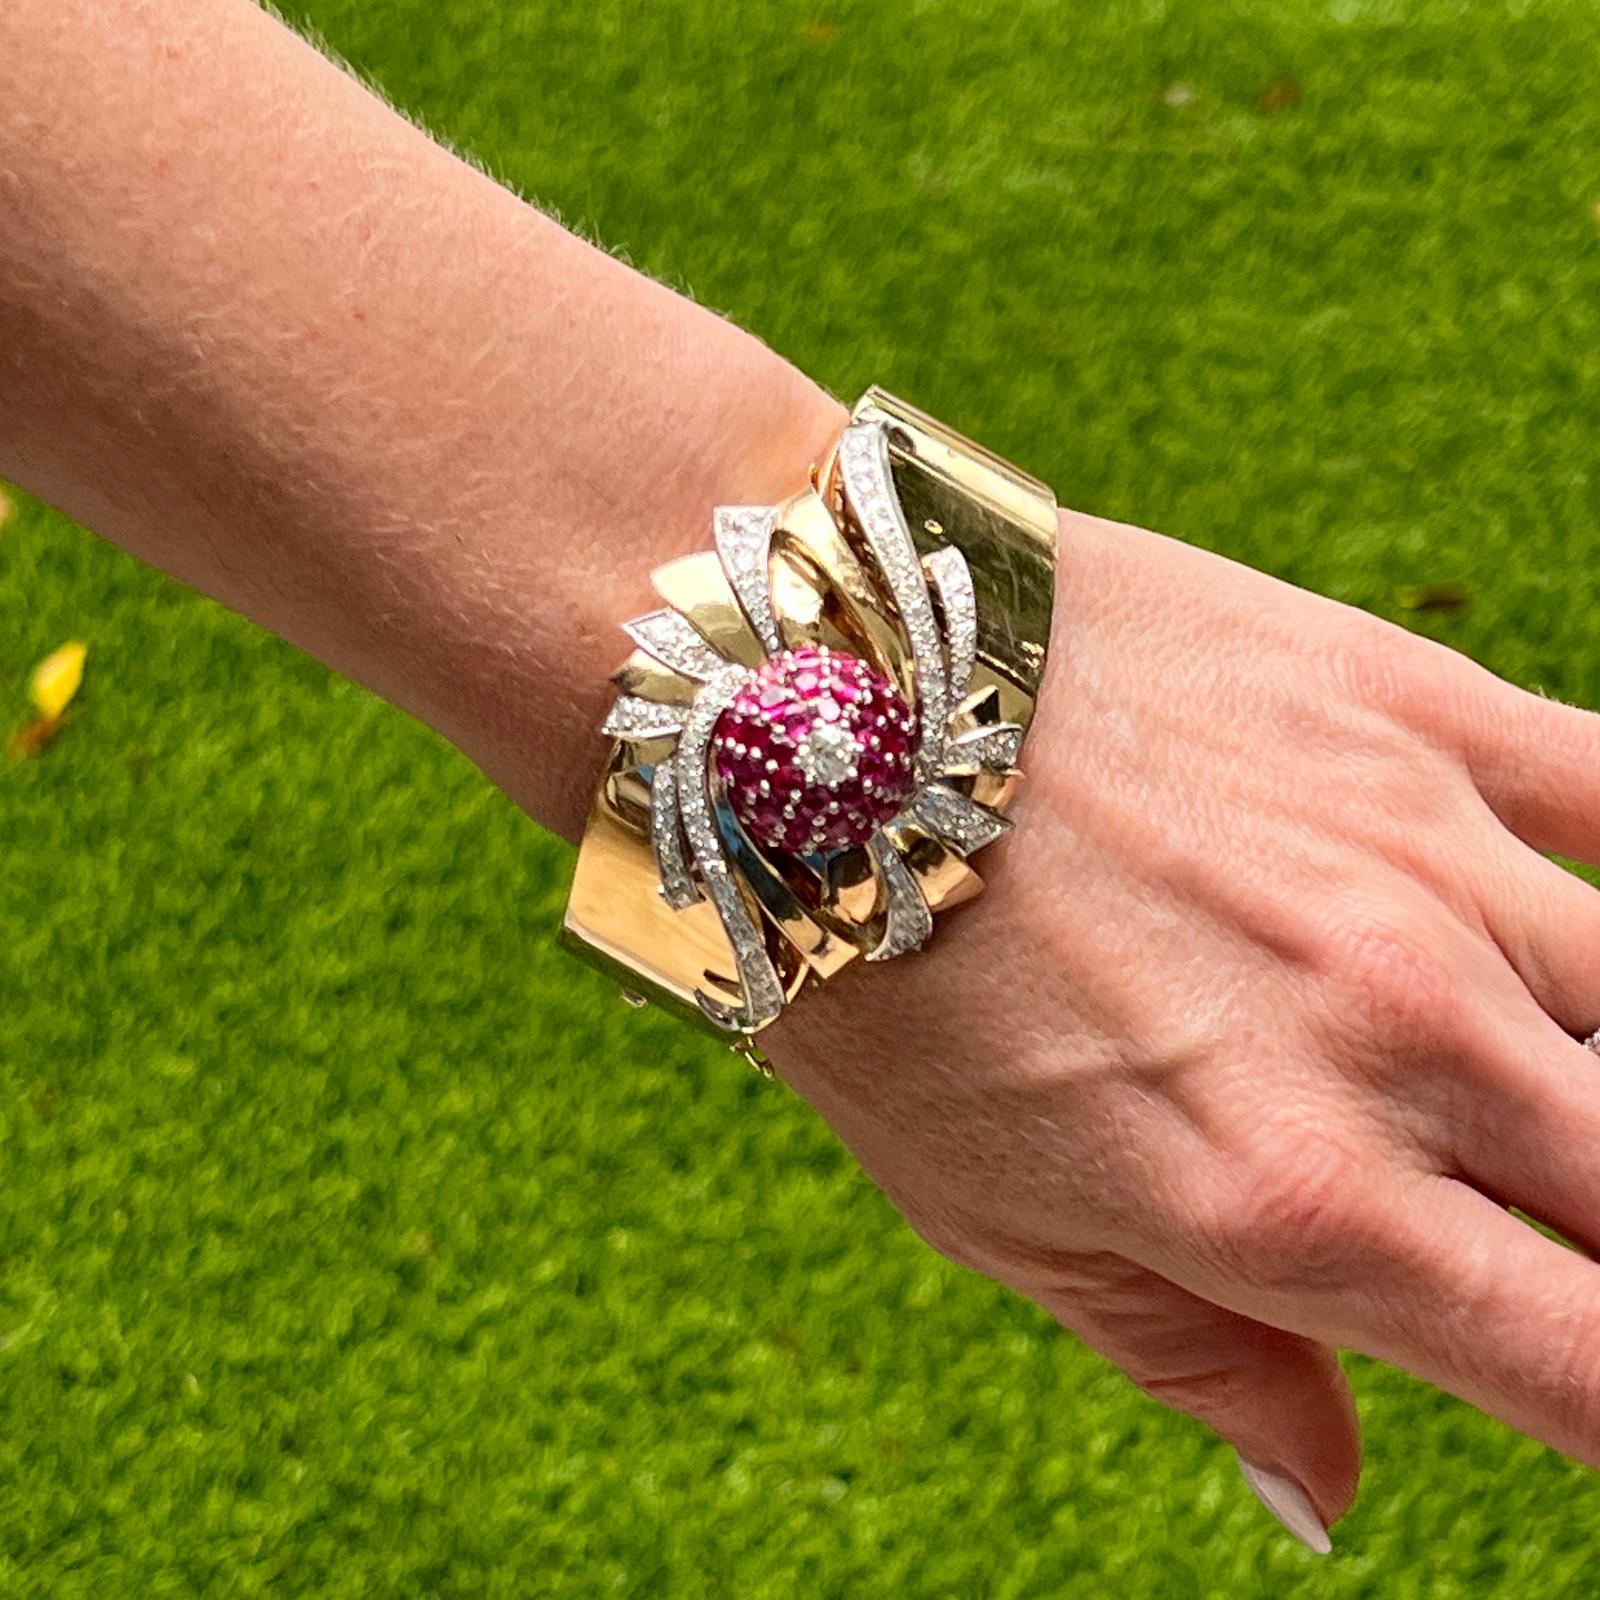 Fabulous Retro diamond and ruby bangle bracelet crafted in 14 karat rose gold. The bangle features 36 round rubies weighing approximately 9.00 CTW and 81 diamonds weighing approoximately 3.30 CTW. The diamonds are graded I-K color and SI clarity.